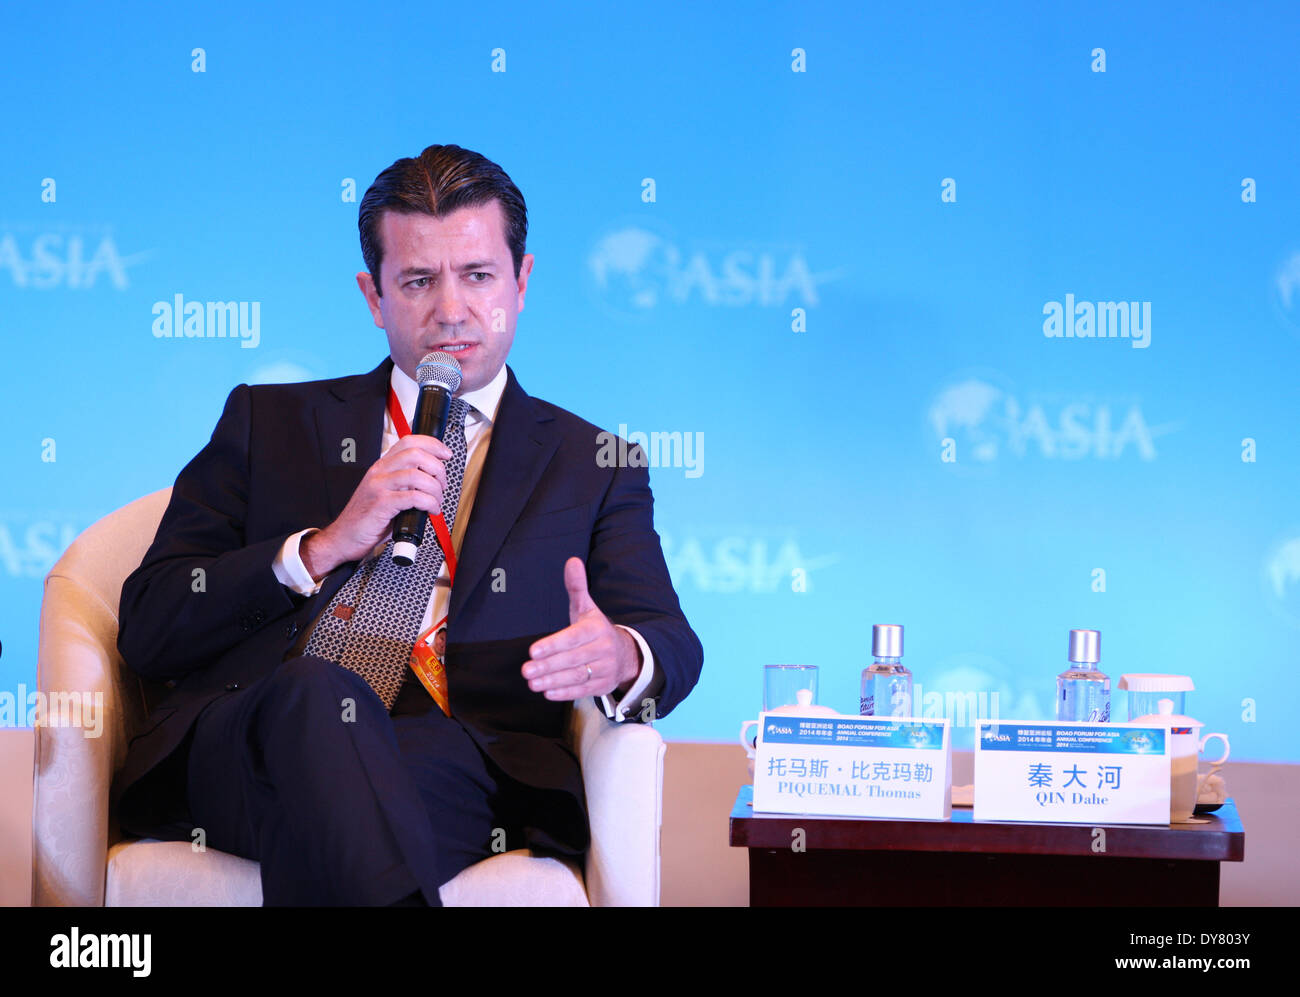 Boao, China's Hainan Province. 9th Apr, 2014. Thomas Piquemal, chief financial officer of Electricite De France, speaks at a forum on new findings on climate change during the Boao Forum for Asia (BFA) Annual Conference 2014 in Boao, south China's Hainan Province, April 9, 2014. © Wang Jingqiang/Xinhua/Alamy Live News Stock Photo